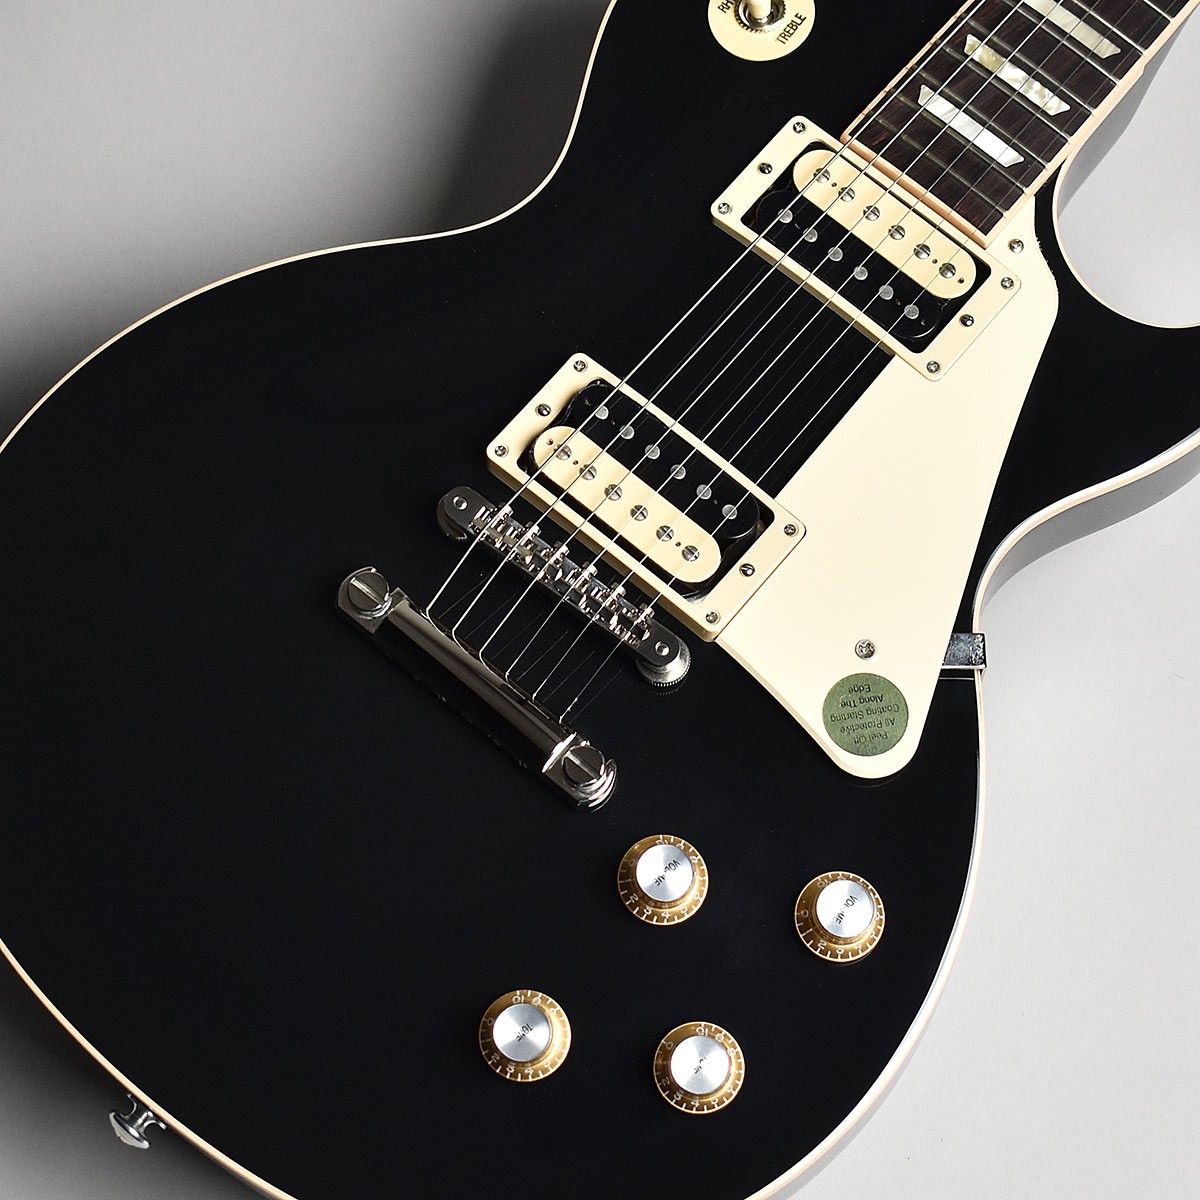 Suspect number 1. One of, but not the only reason for the problems. A beautiful Gibson Les Paul Classic 2019 with a 60’s neck profile and cool Zebra pickups — and surprisingly, a tailpiece that touched the body of the guitar, a rarity in this modern Gibson age, if ever I’ve seen one!